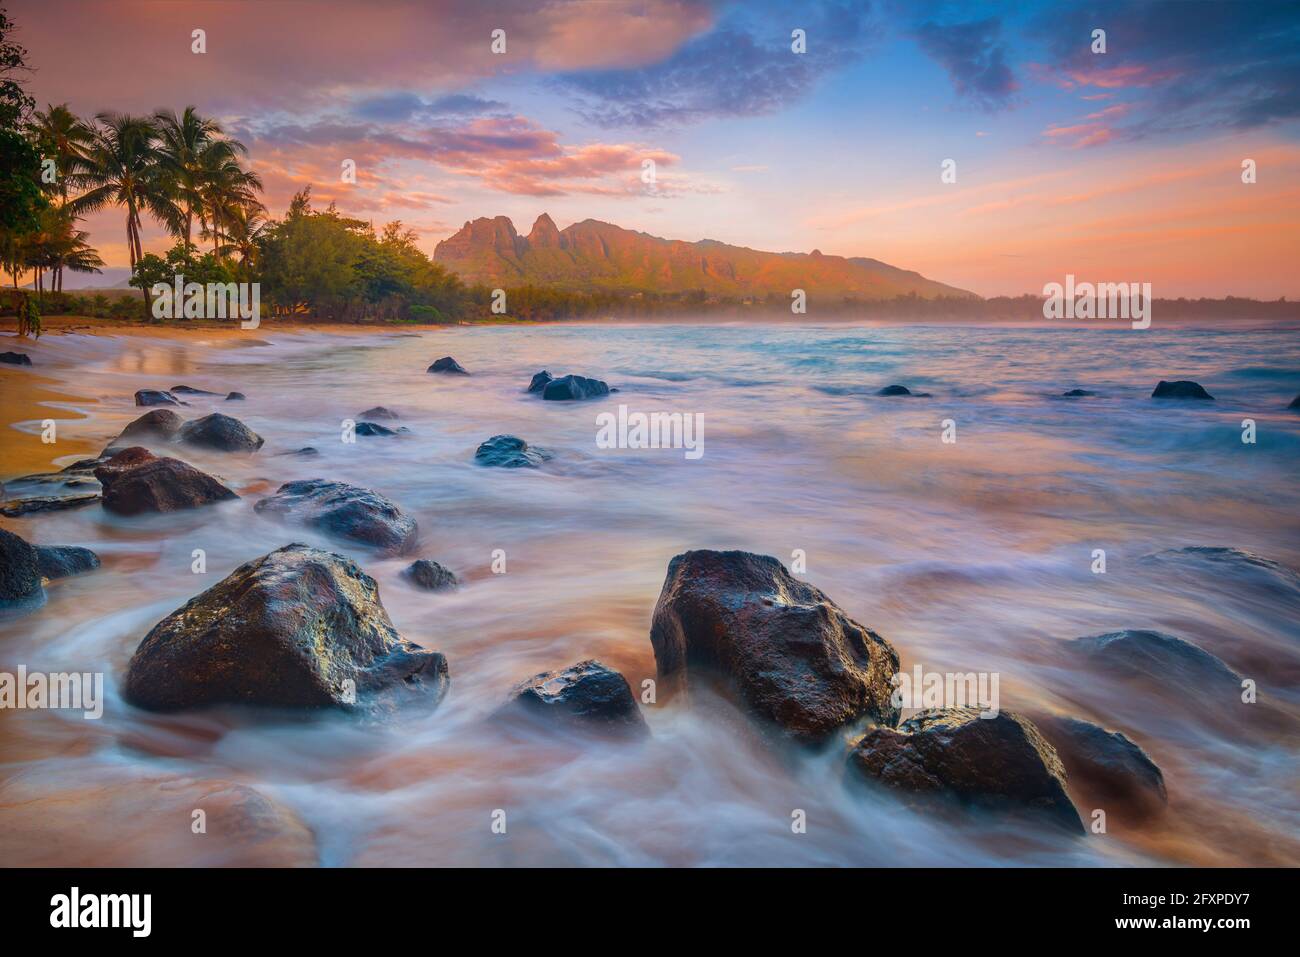 Sunrise over the calm bay waters at Anahola Beach Park, Kalalea mountain in the distance, Hawaii, United States of America, North America Stock Photo